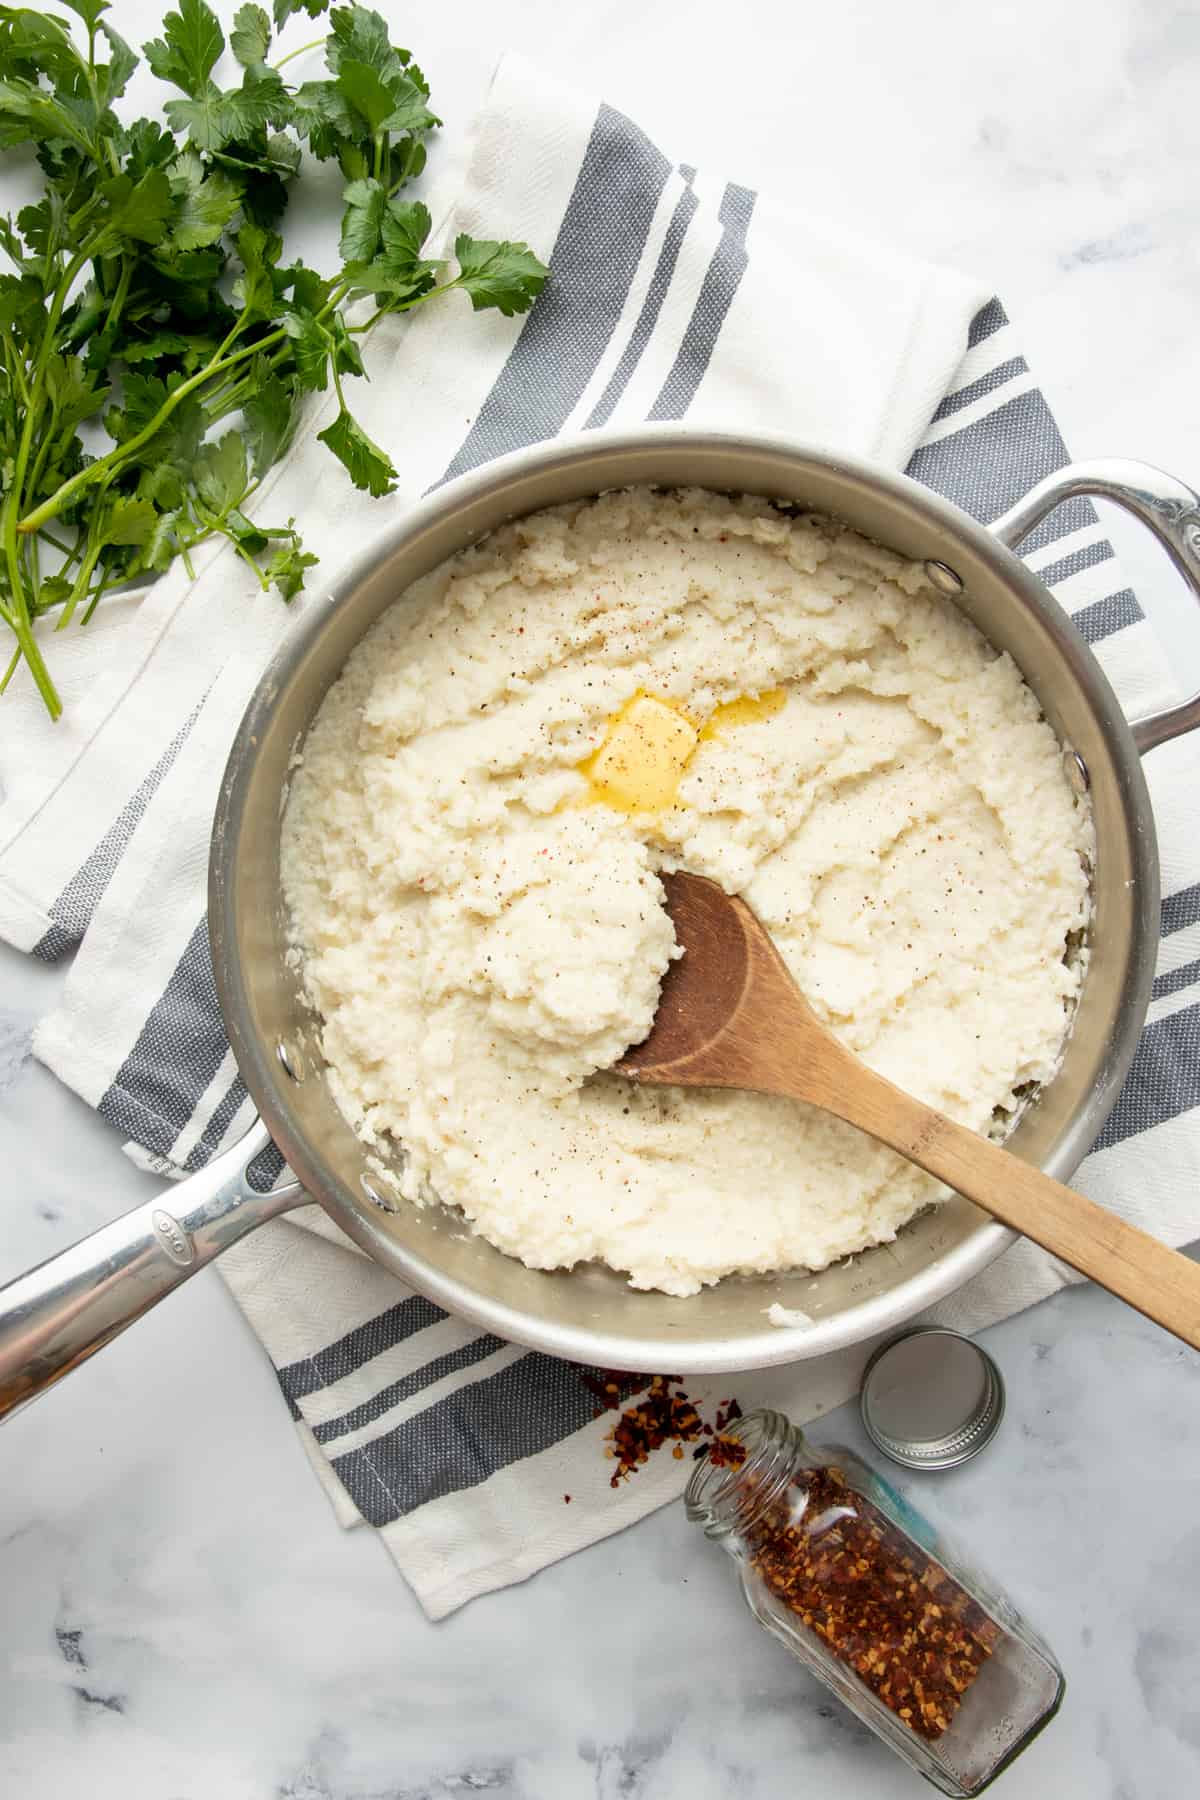 Cauliflower grits in a saucepan are mixed with a wooden spoon.